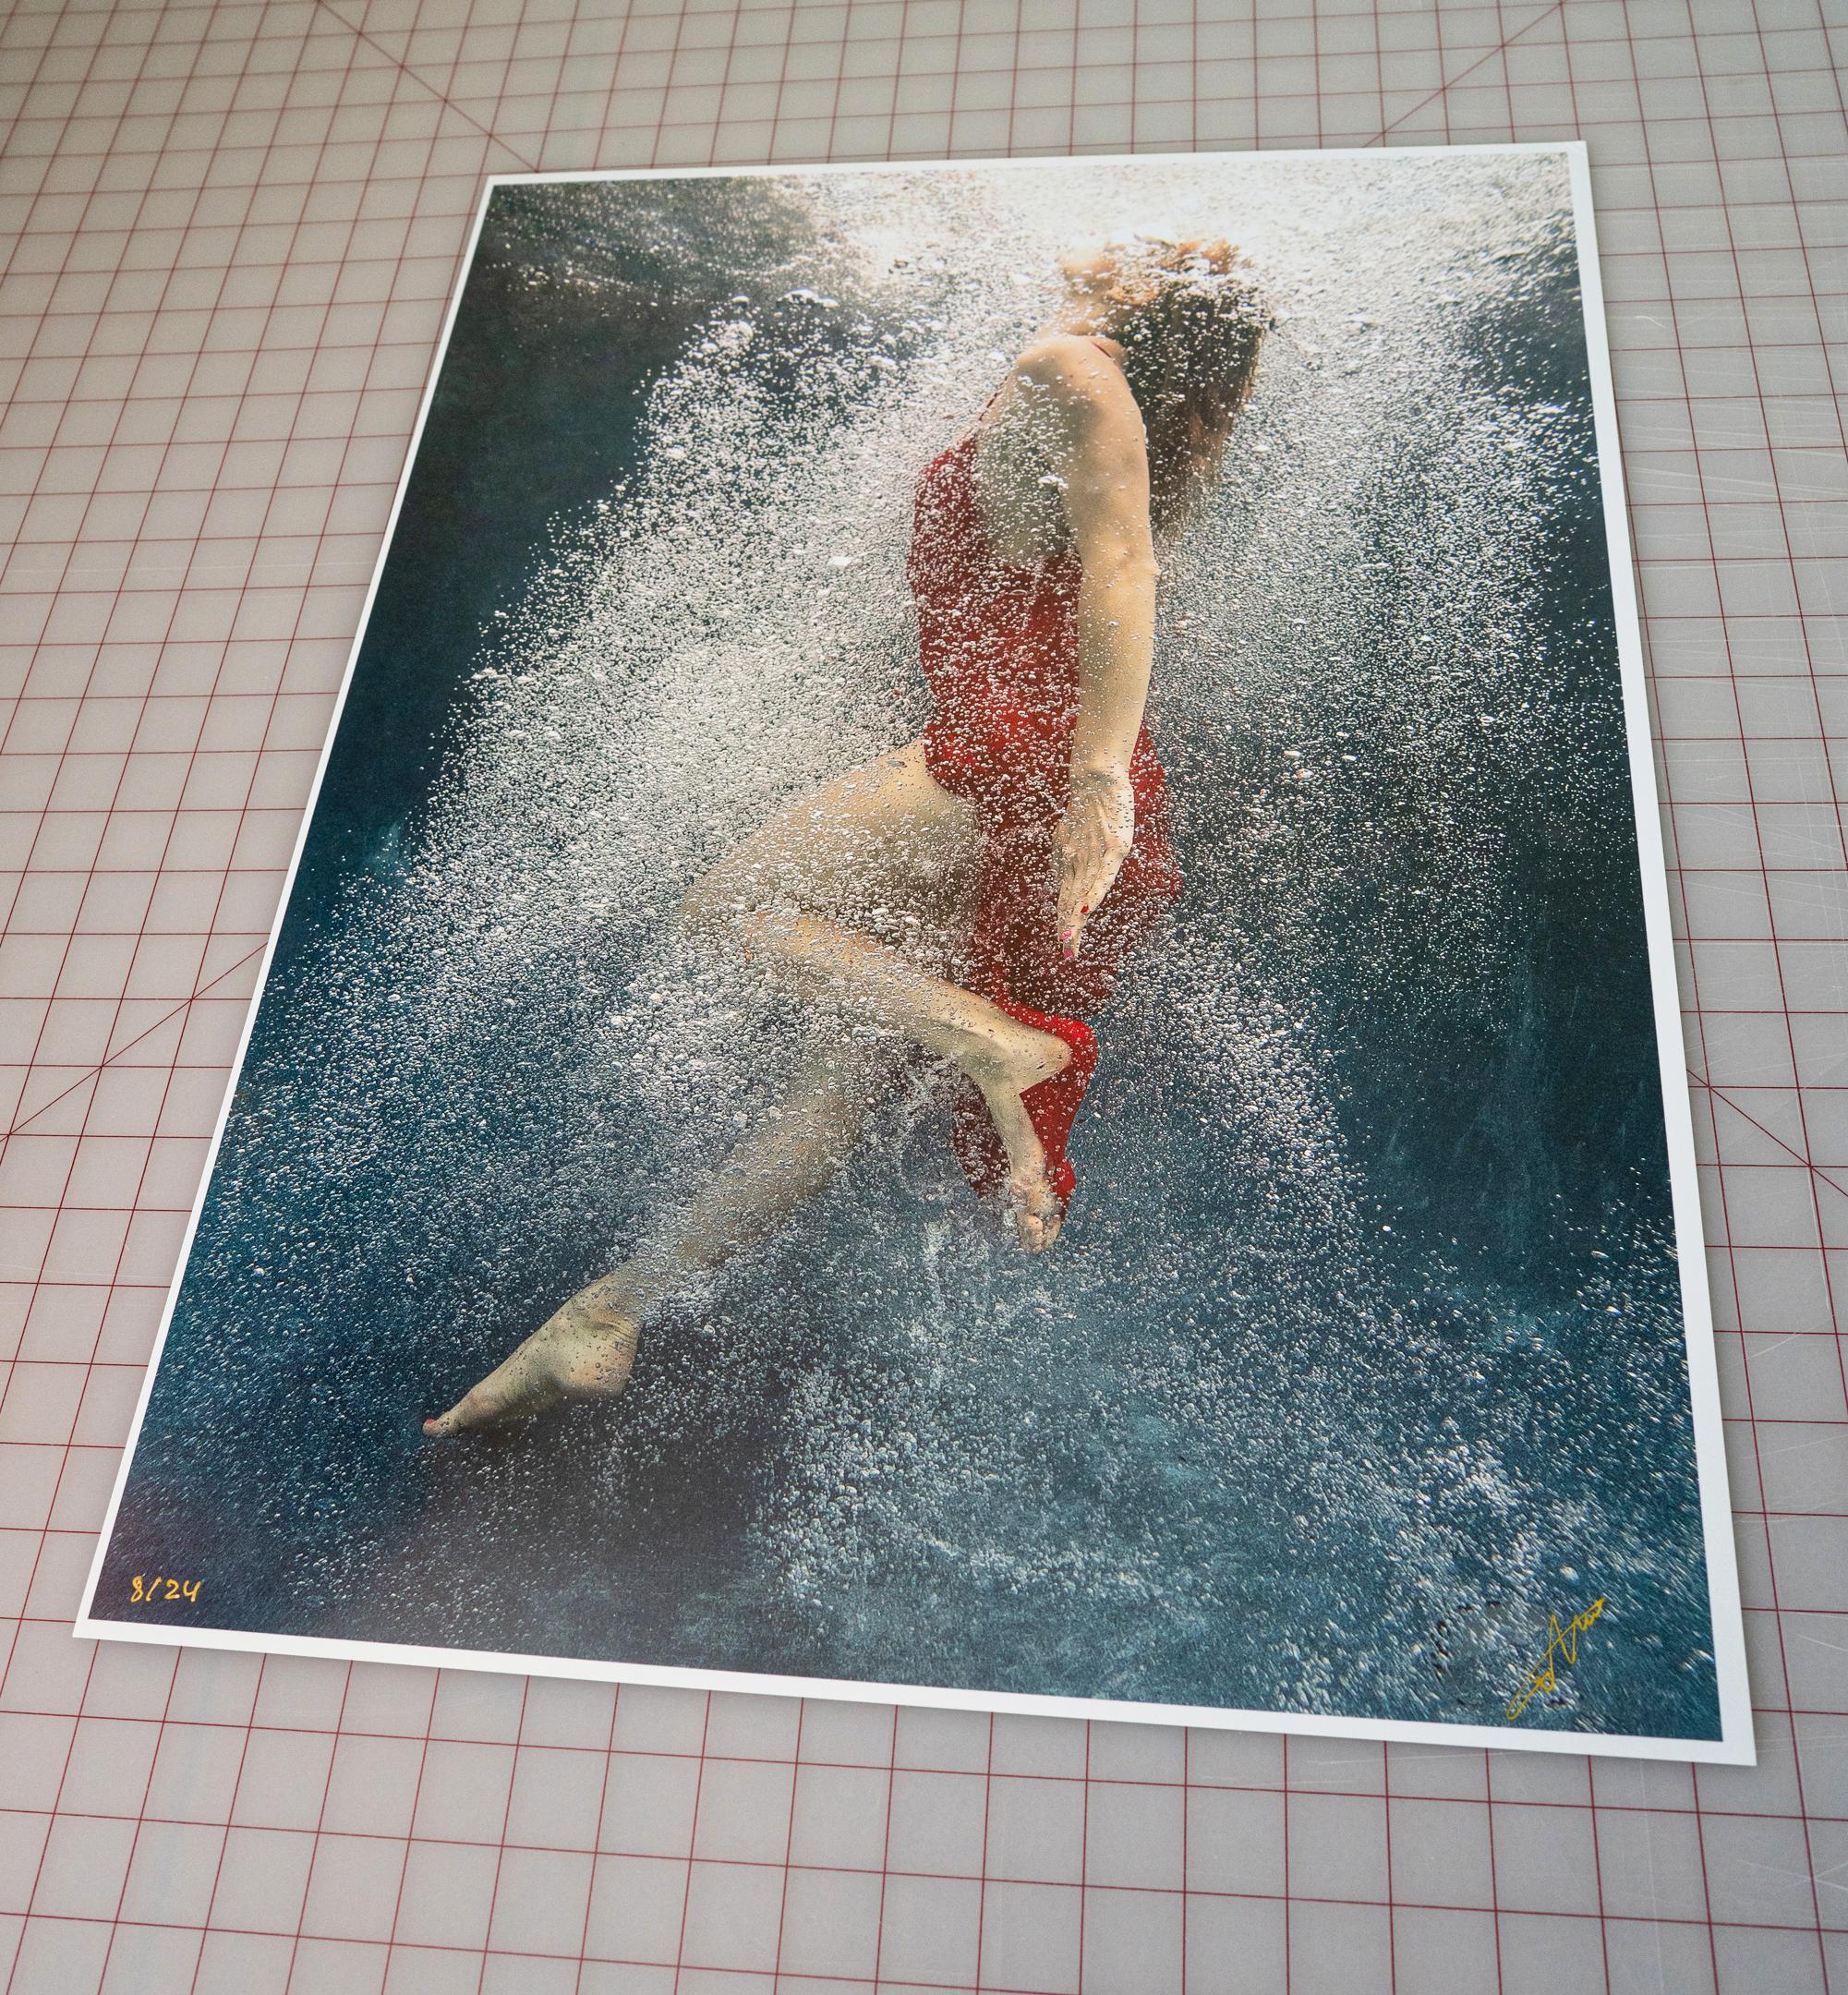 Coming Back - underwater photograph - archival pigment print 24x18